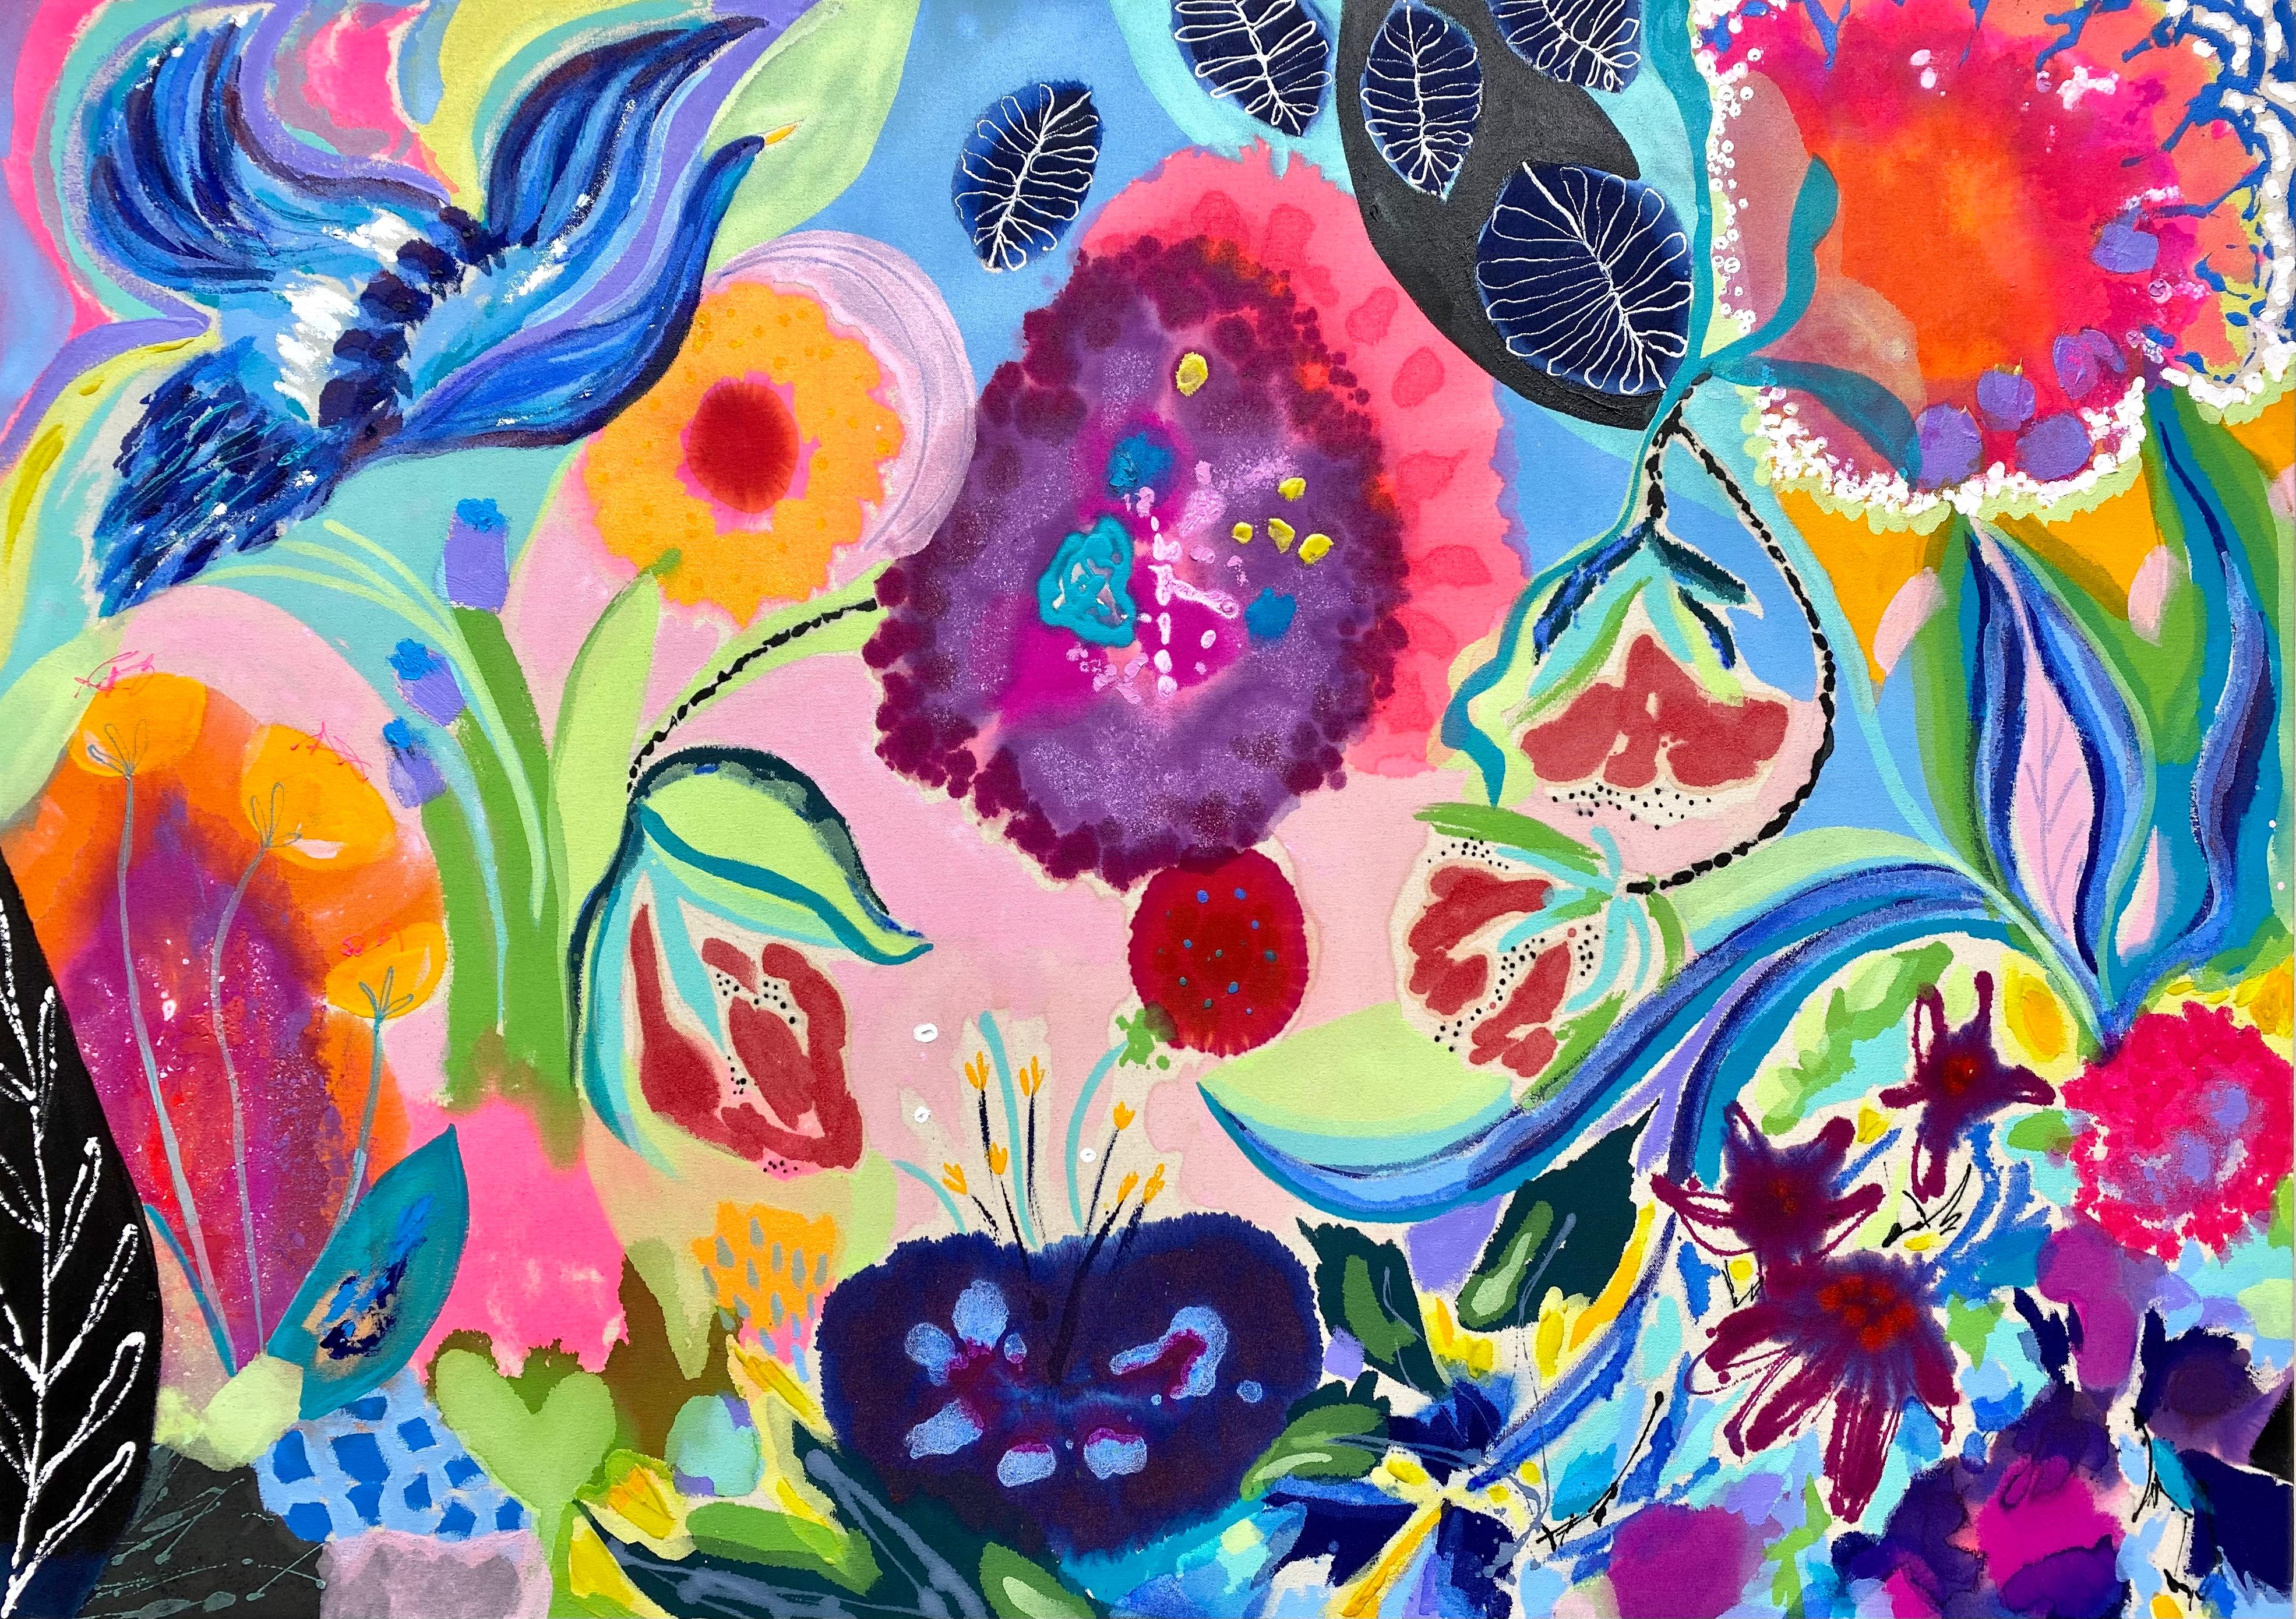 Joyful Abundance, Original Bold and Bright Contemporary Abstract Painting
46x65x2.5 (HxWxD), Acrylic Paint

The title of this painting suits it perfectly: there is an overwhelming amount of joy that spills out from this colorful composition. Wyanne